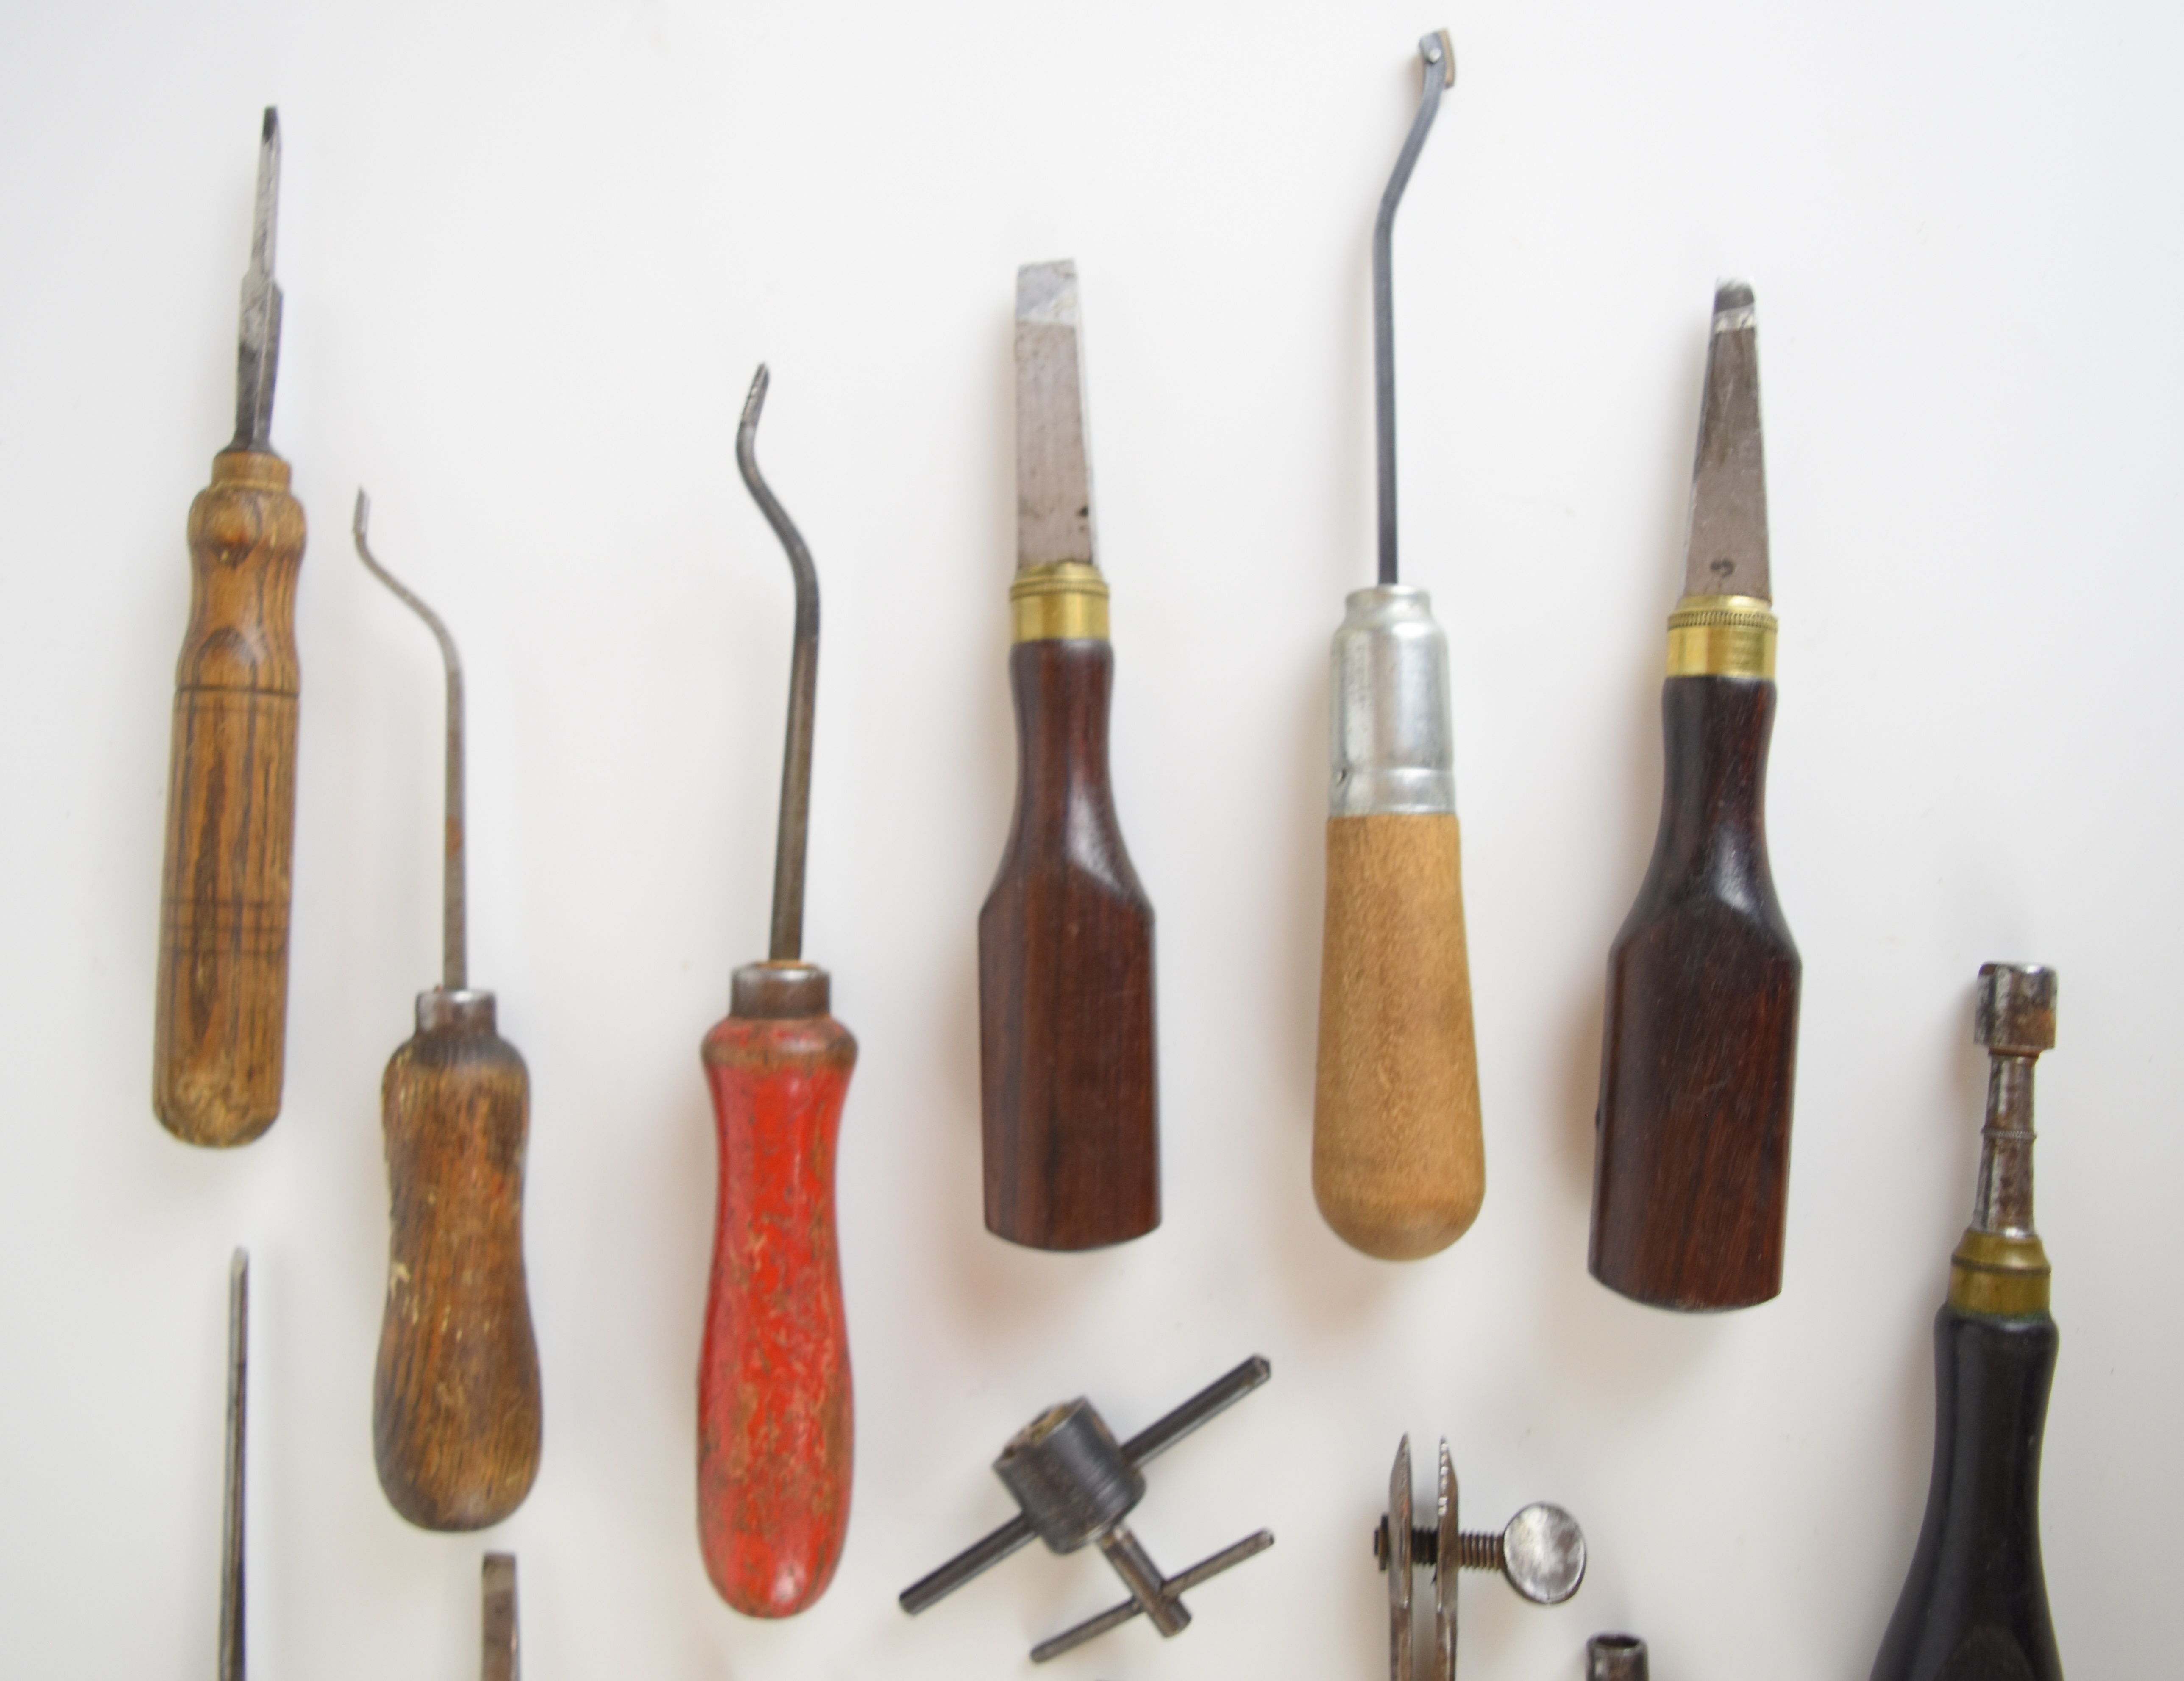 Fourteen vintage gun or gunsmith tools including screwdrivers, bullet moulds, chequering tools, - Image 3 of 3